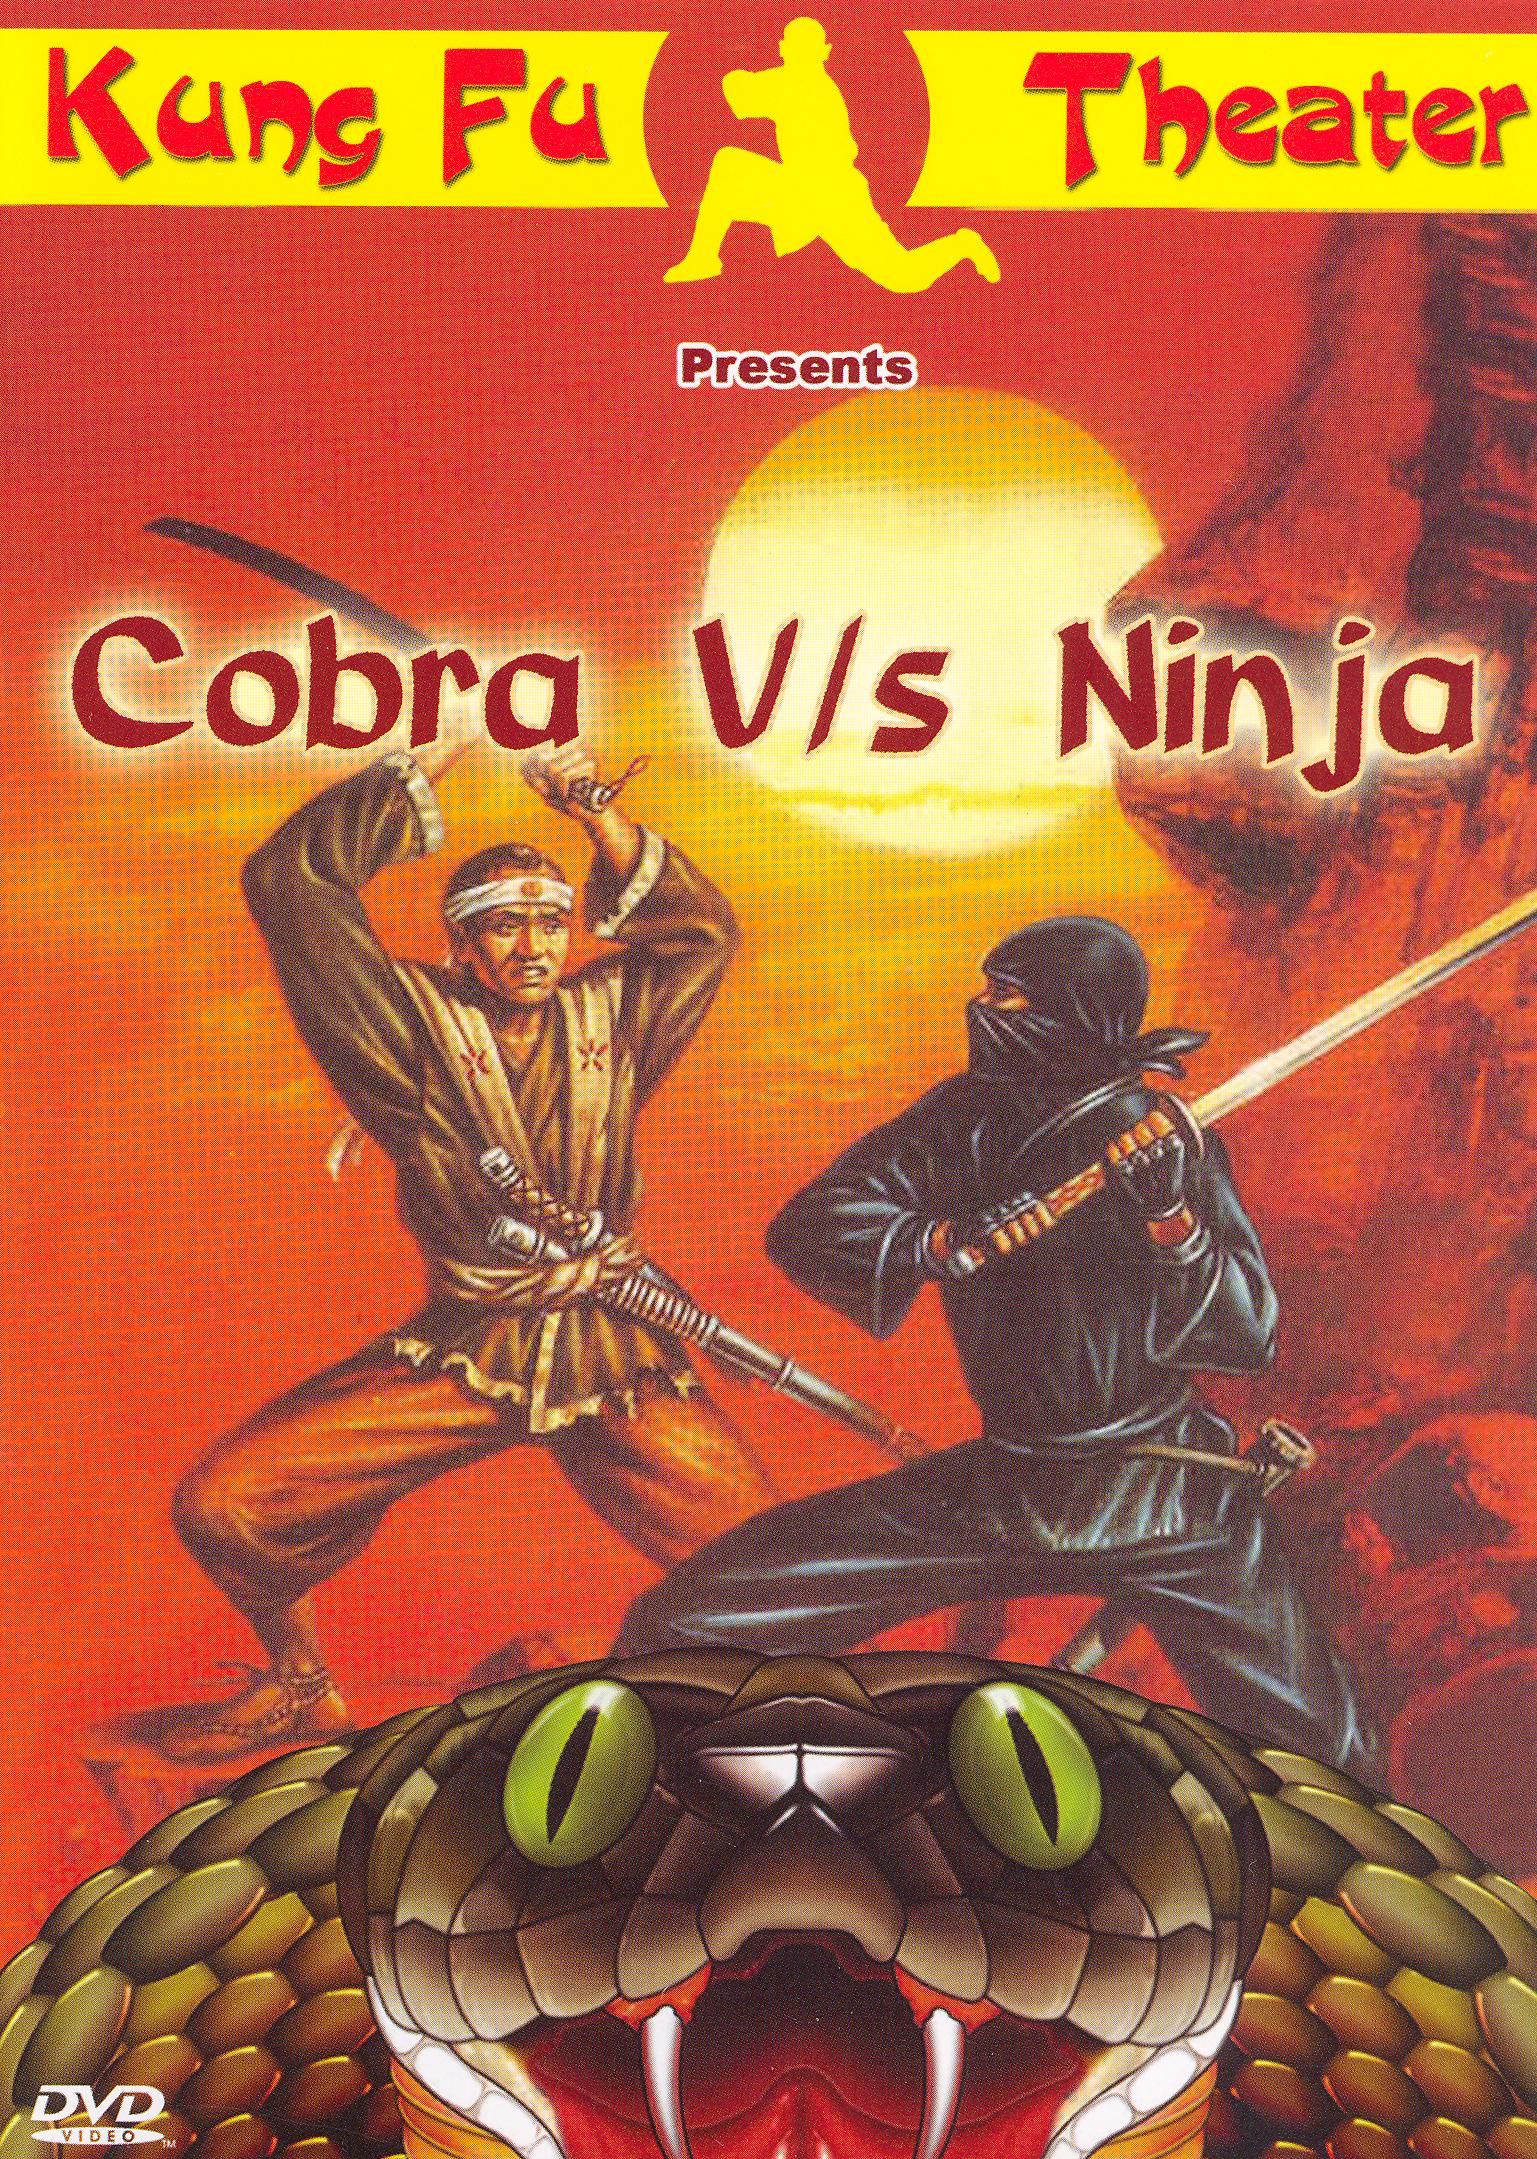 Cobra Against Ninja - Where to Watch and Stream - TV Guide